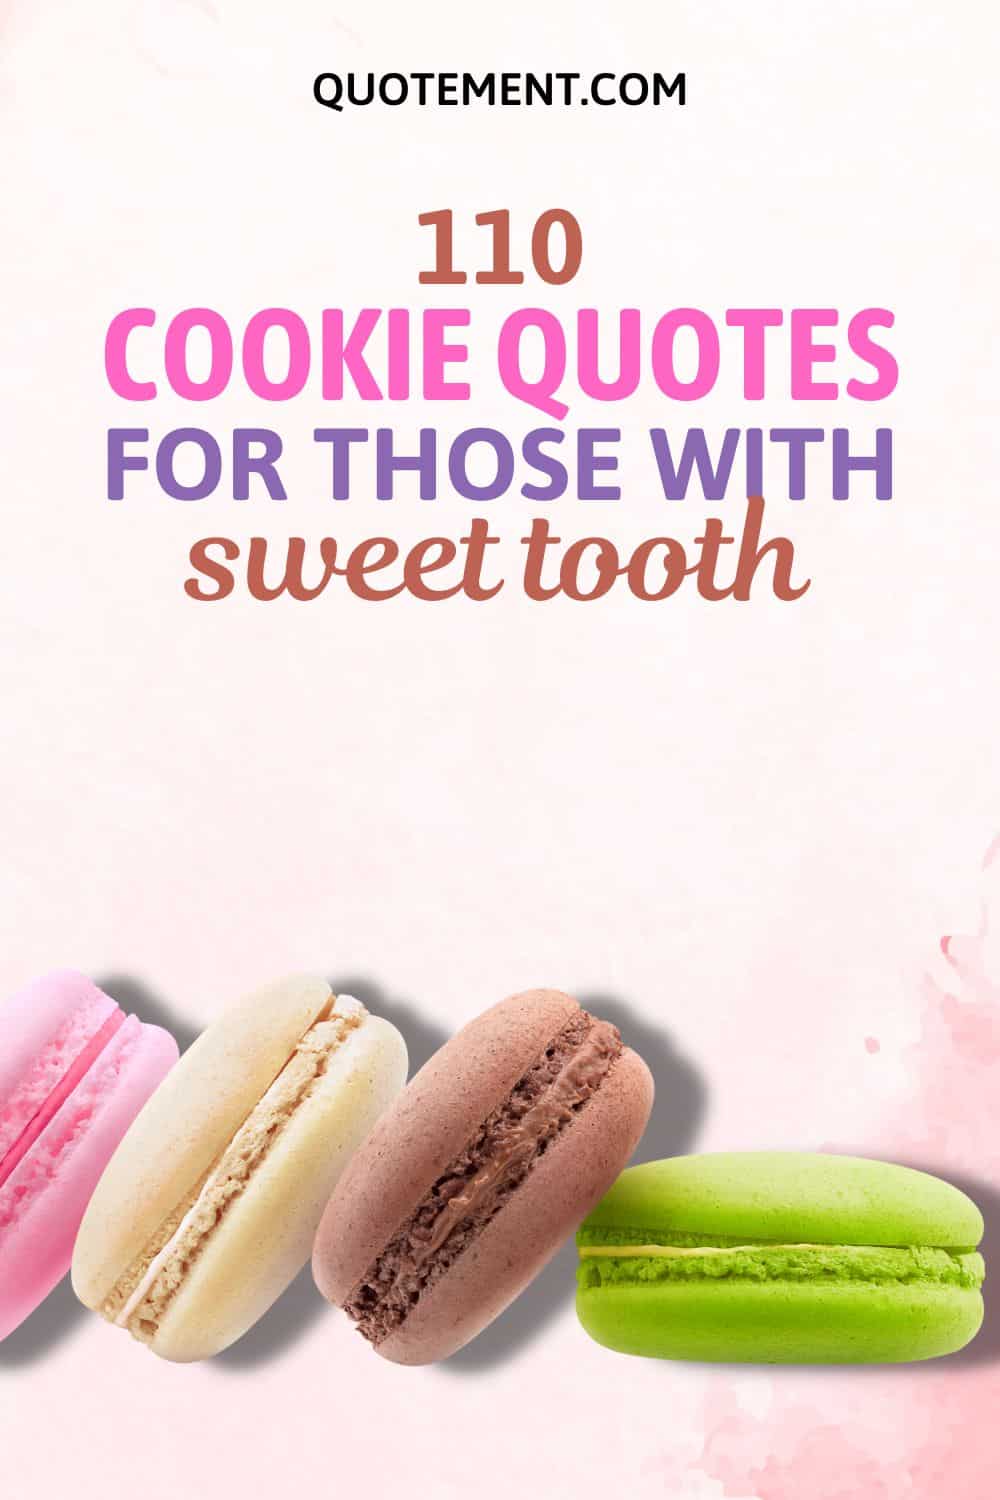 120 Awesome Cookie Quotes To Make You Wanna Bake Some
